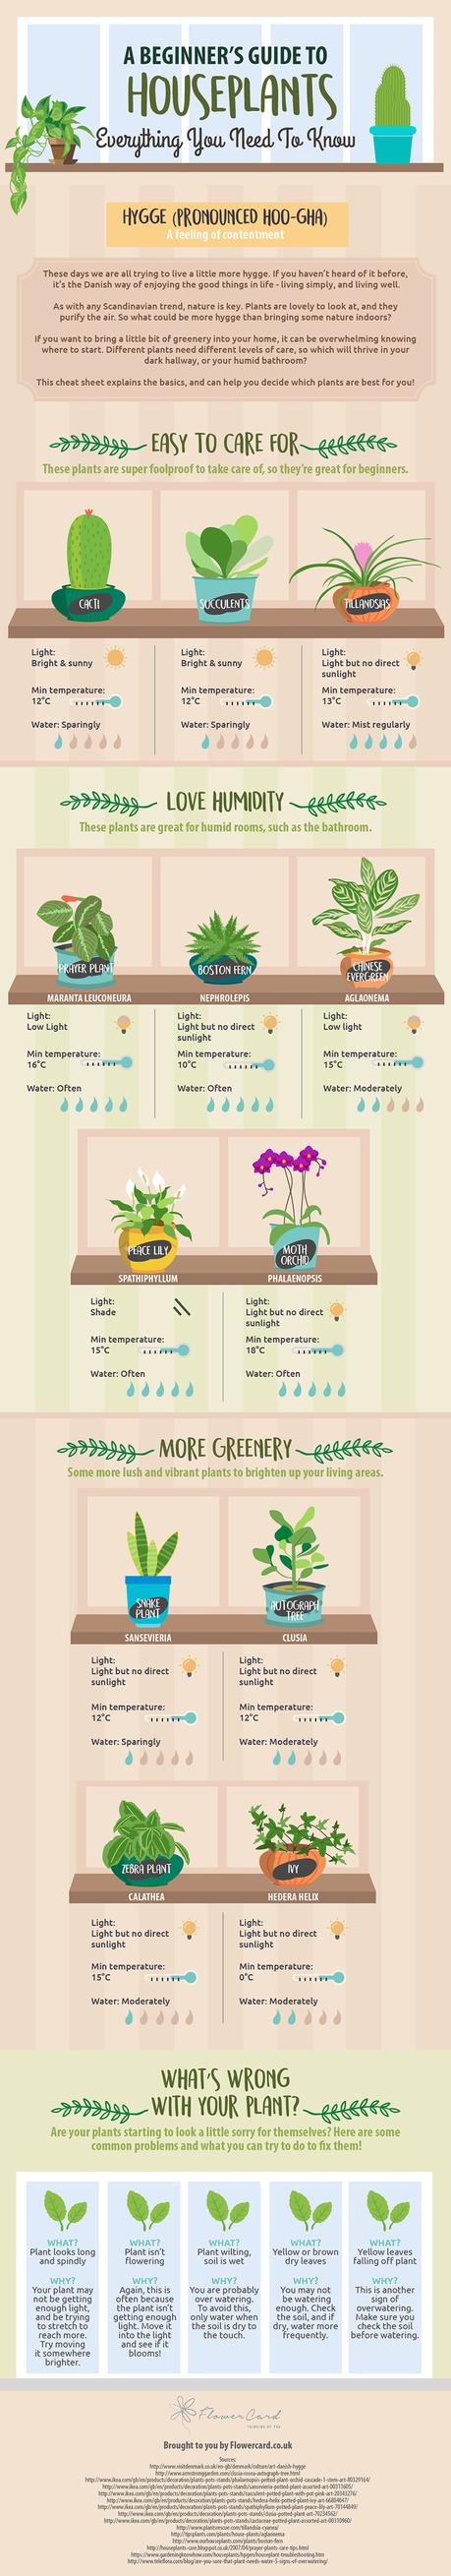 Everything you need to know about houseplants (infographic)